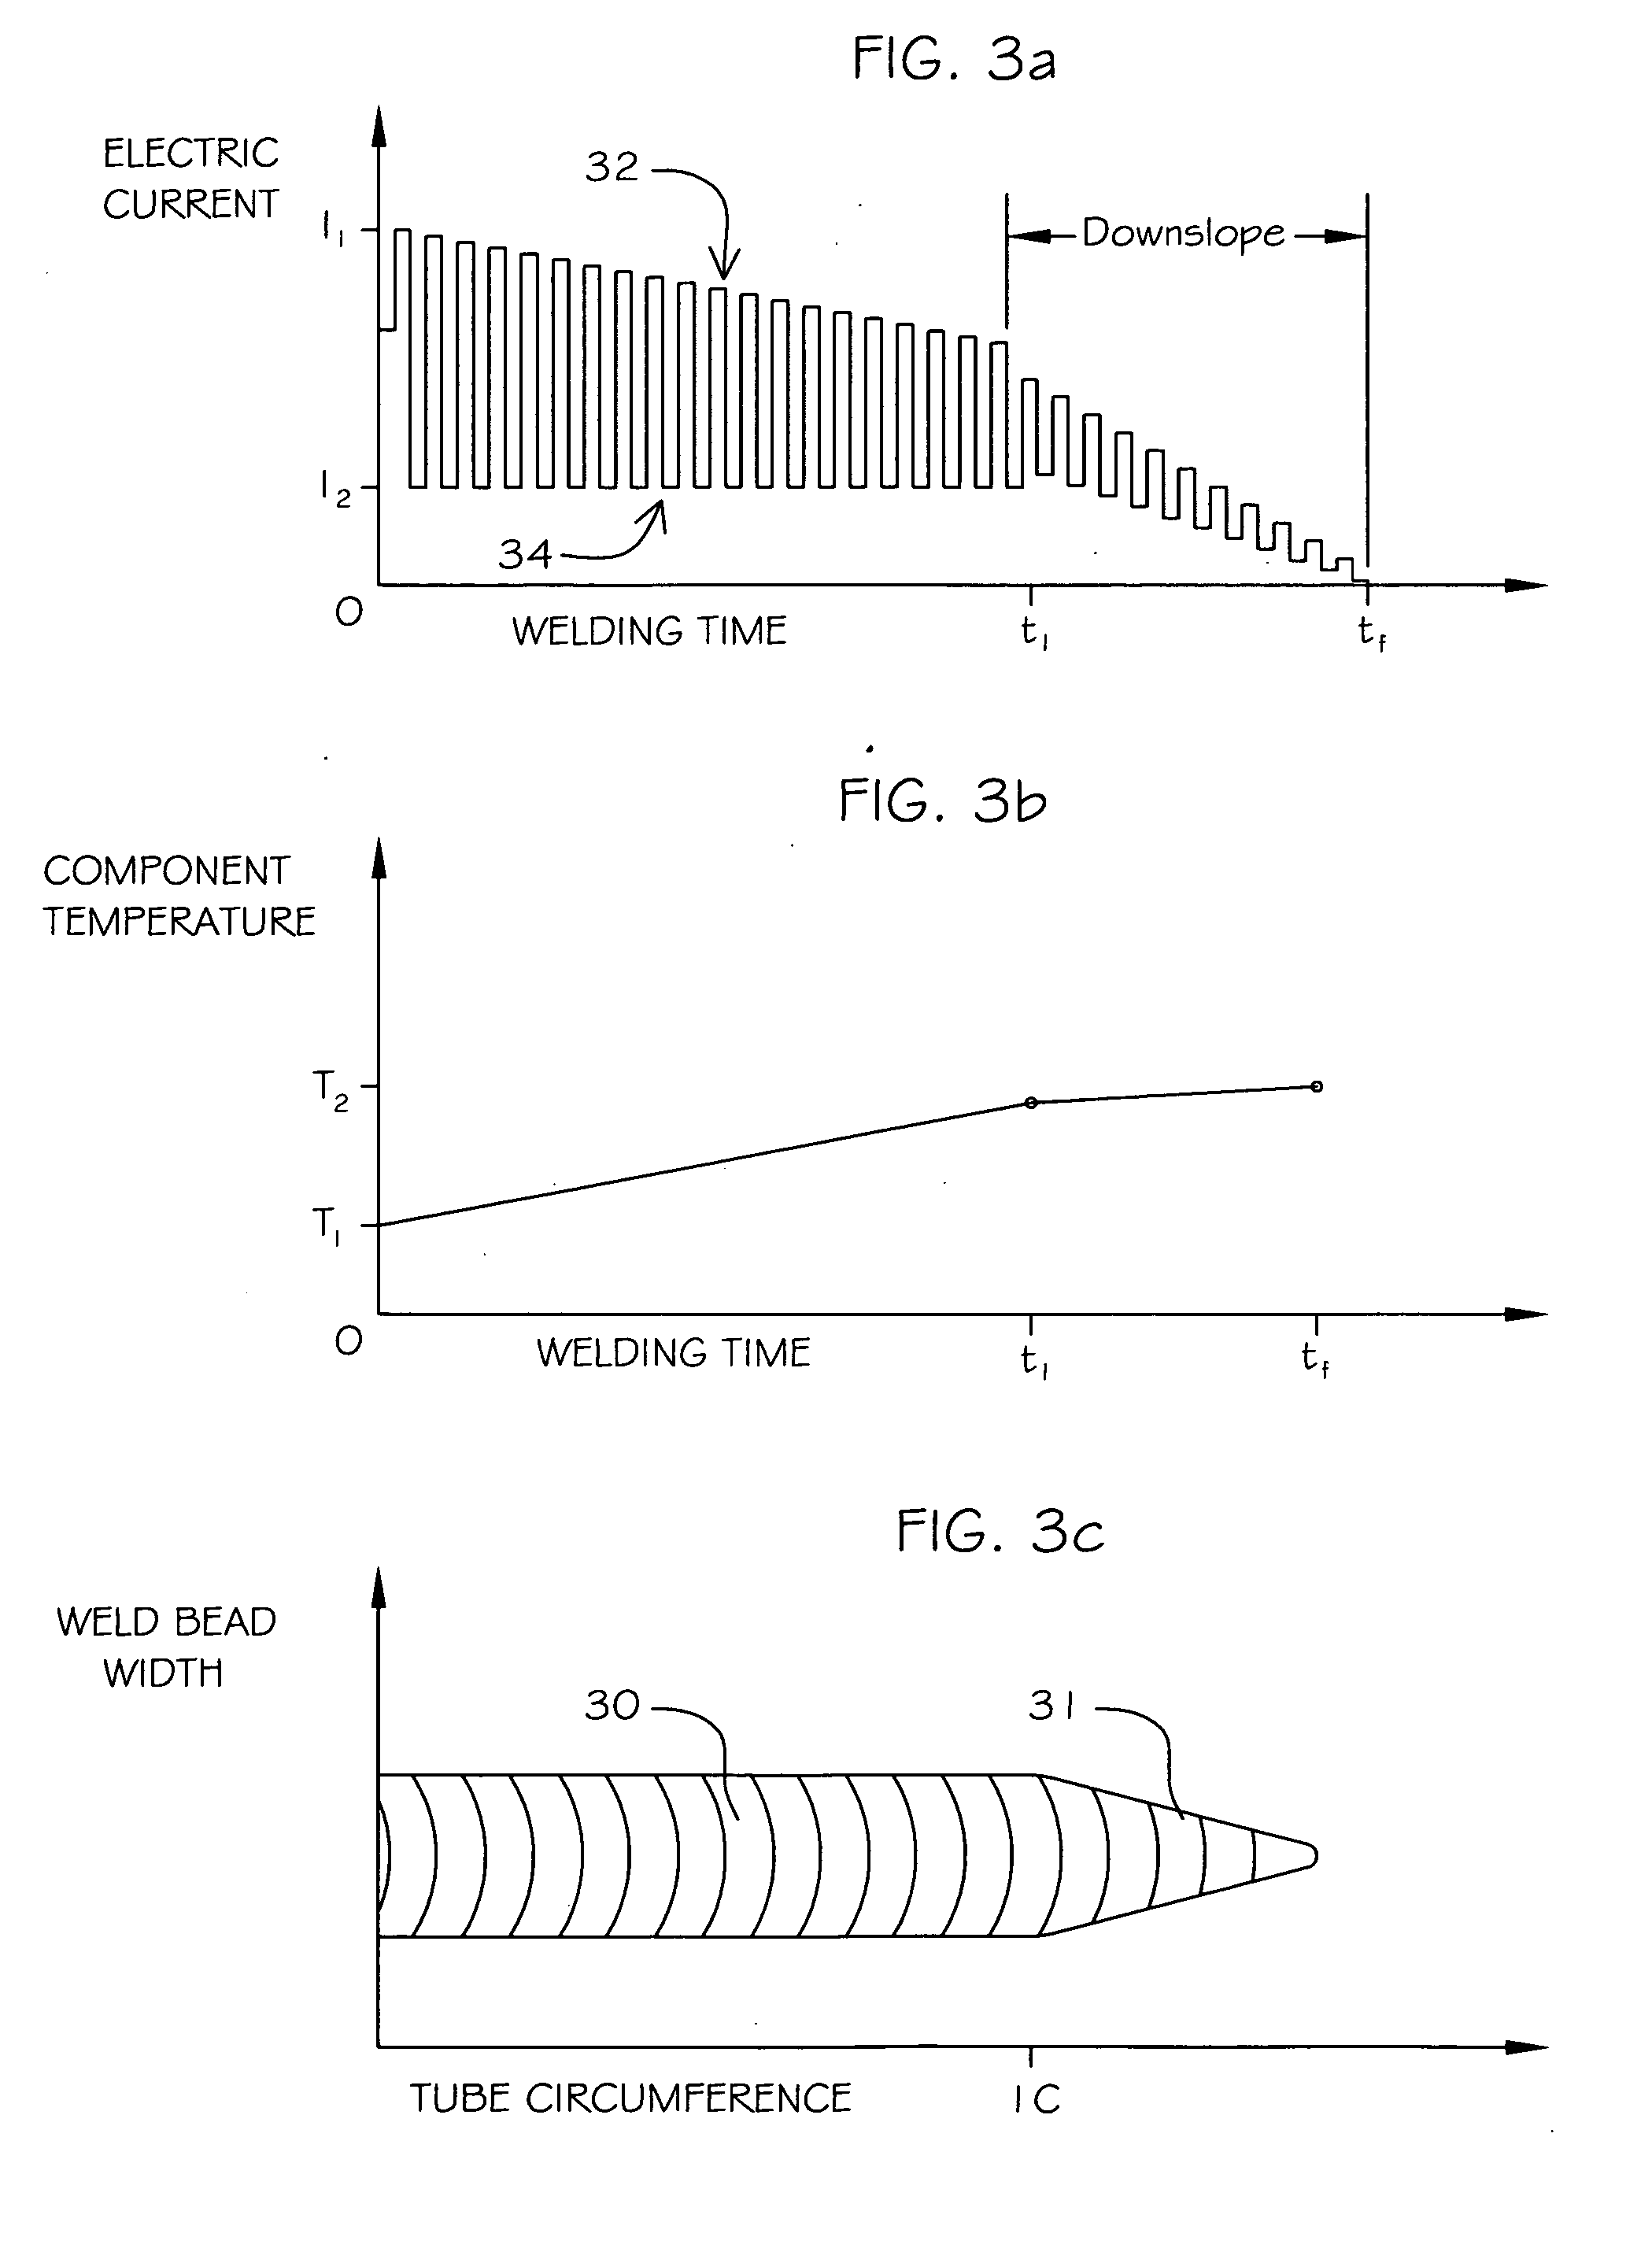 Method for orbital welding using a pulsed current